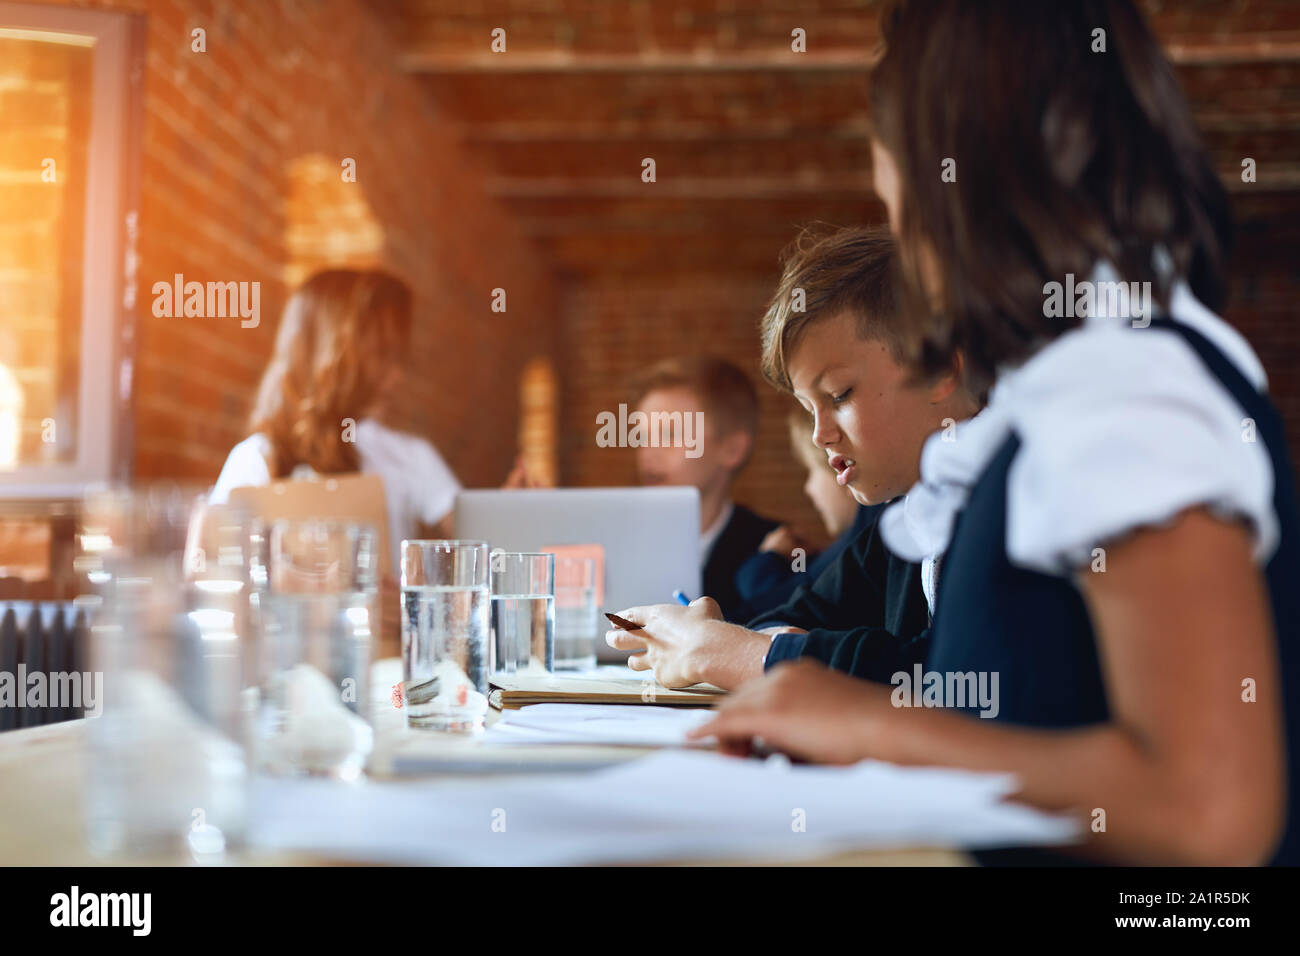 boy and girl in stylish office clothes taking aprt in the conference, eriting something on sheet of papre, close up side view photo Stock Photo